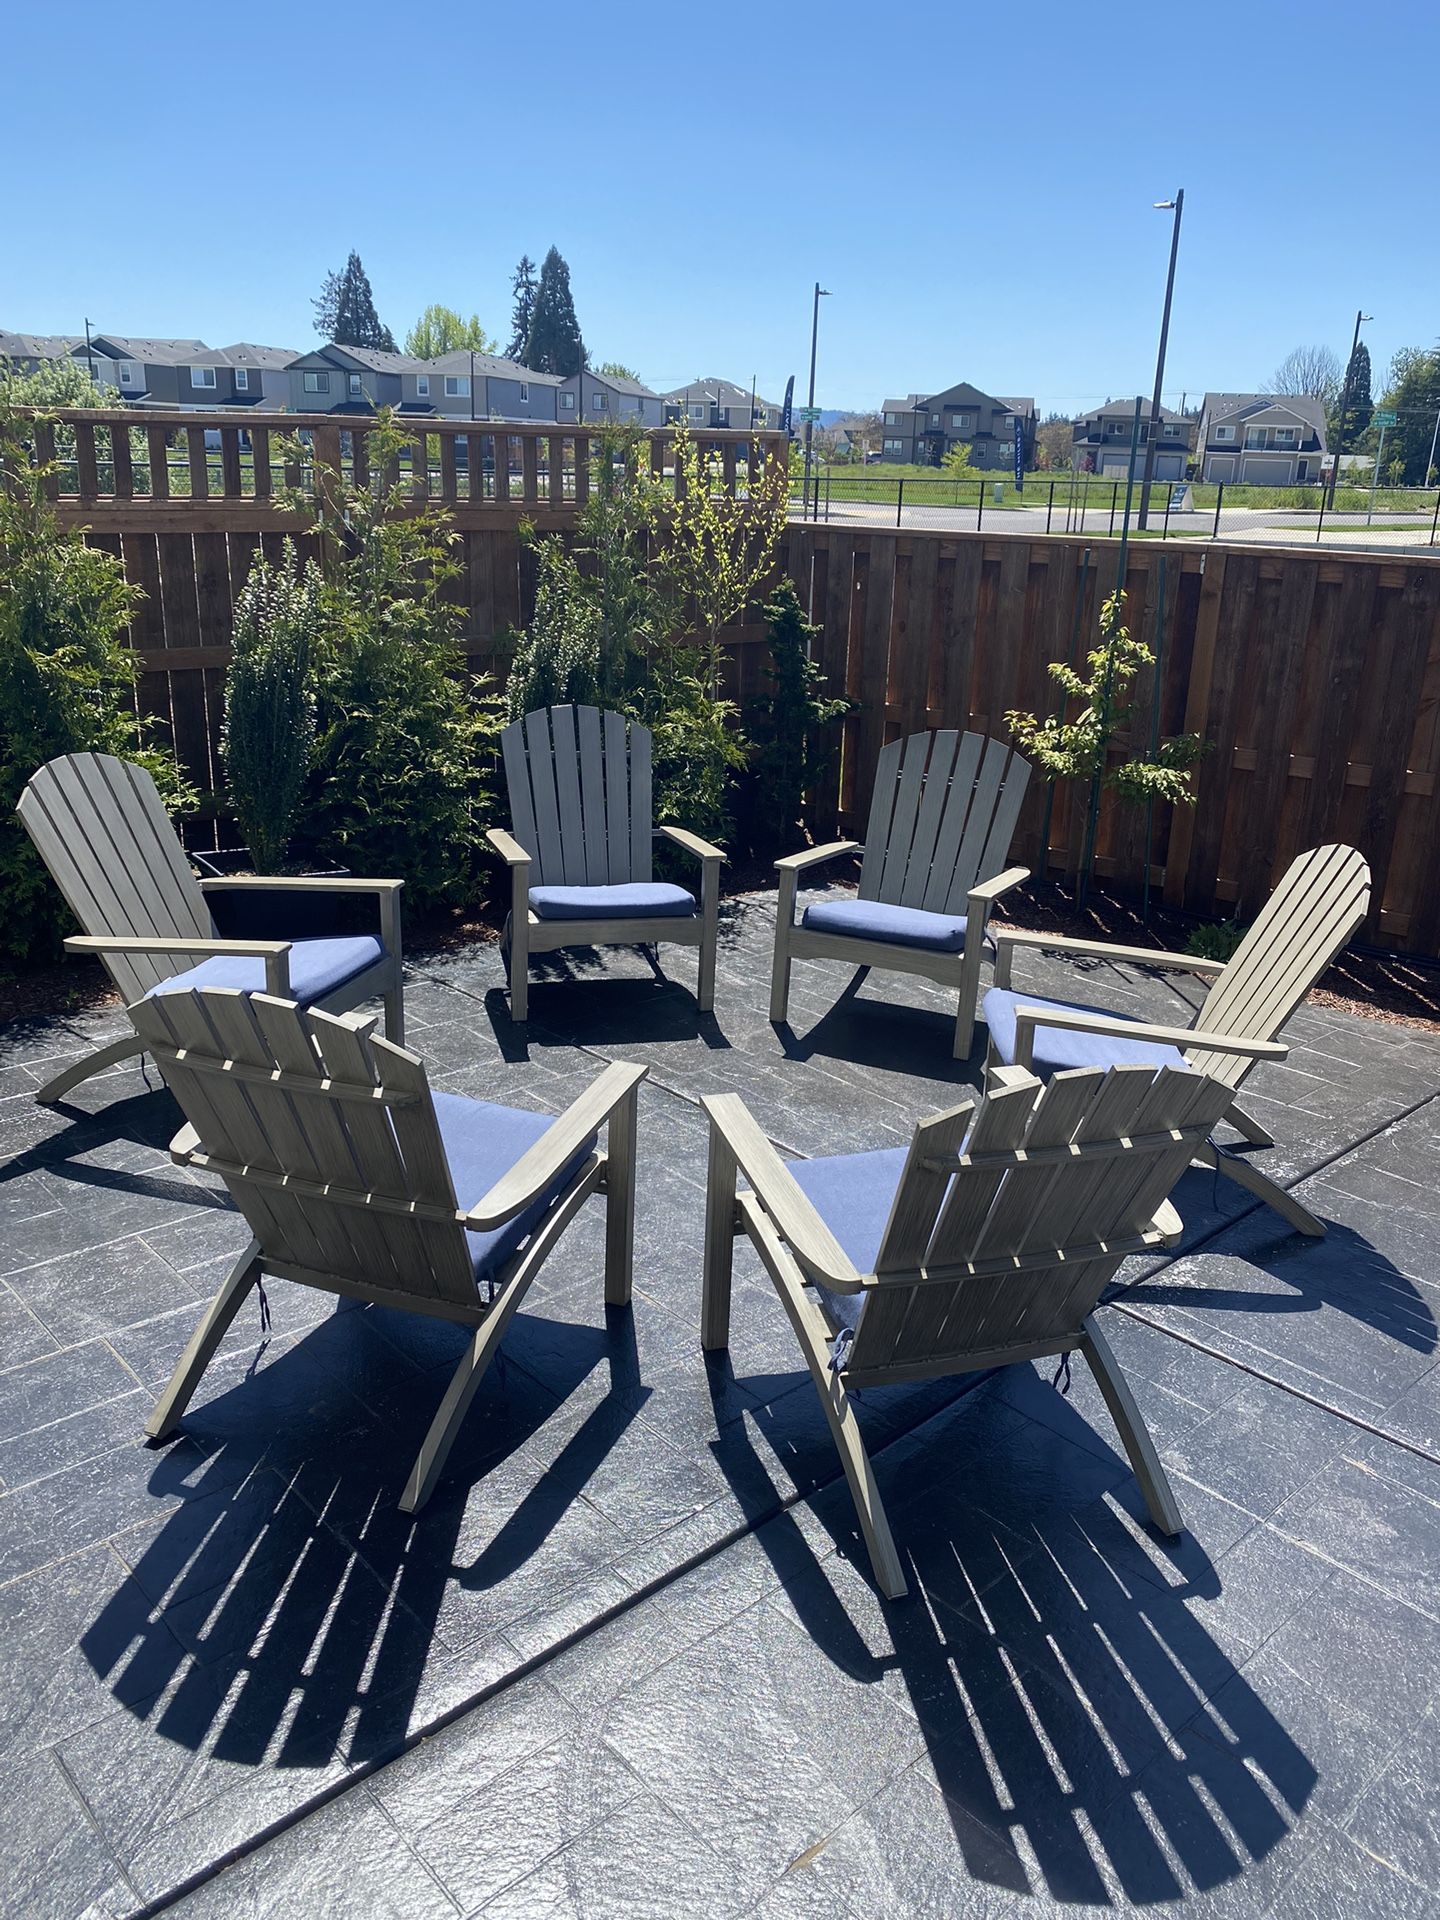 Aluminum Adirondack Chairs-4 for $100 Includes Cushions.